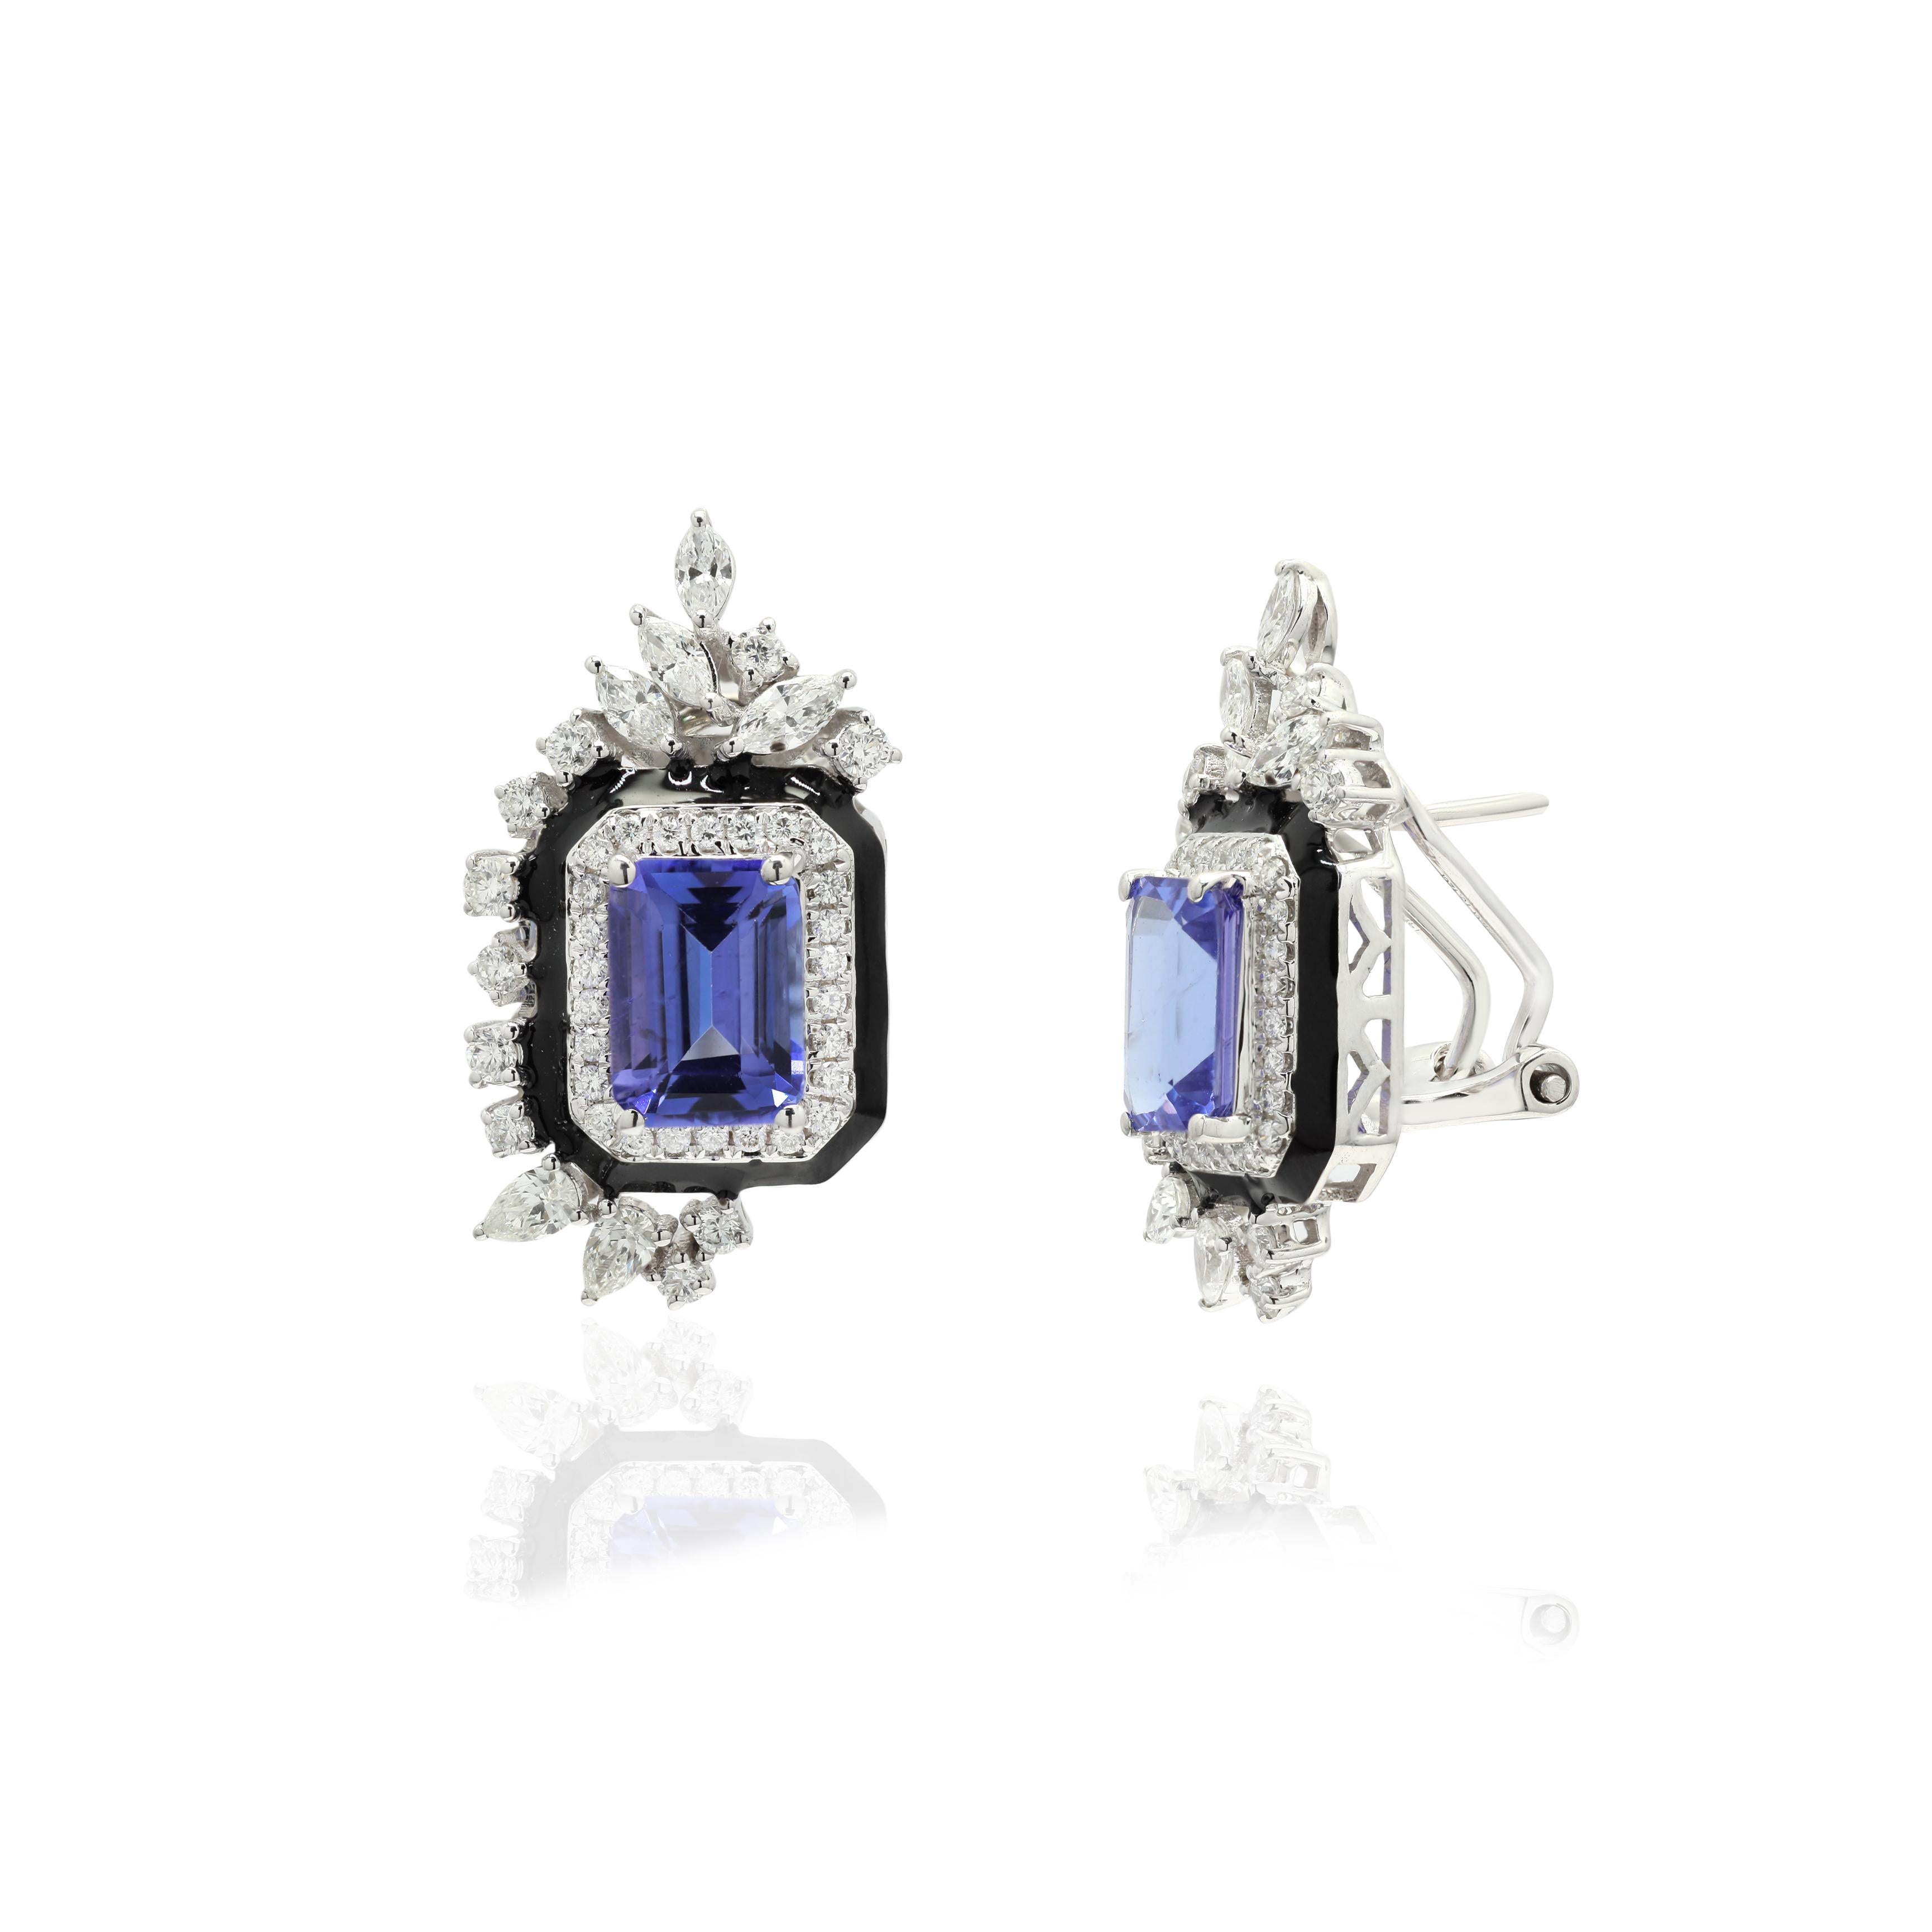 Studs create a subtle beauty while showcasing the colors of the natural precious gemstones and illuminating diamonds making a statement.
Tanzanite studs with diamonds in 14K gold. Embrace your look with these stunning pair of earrings suitable for